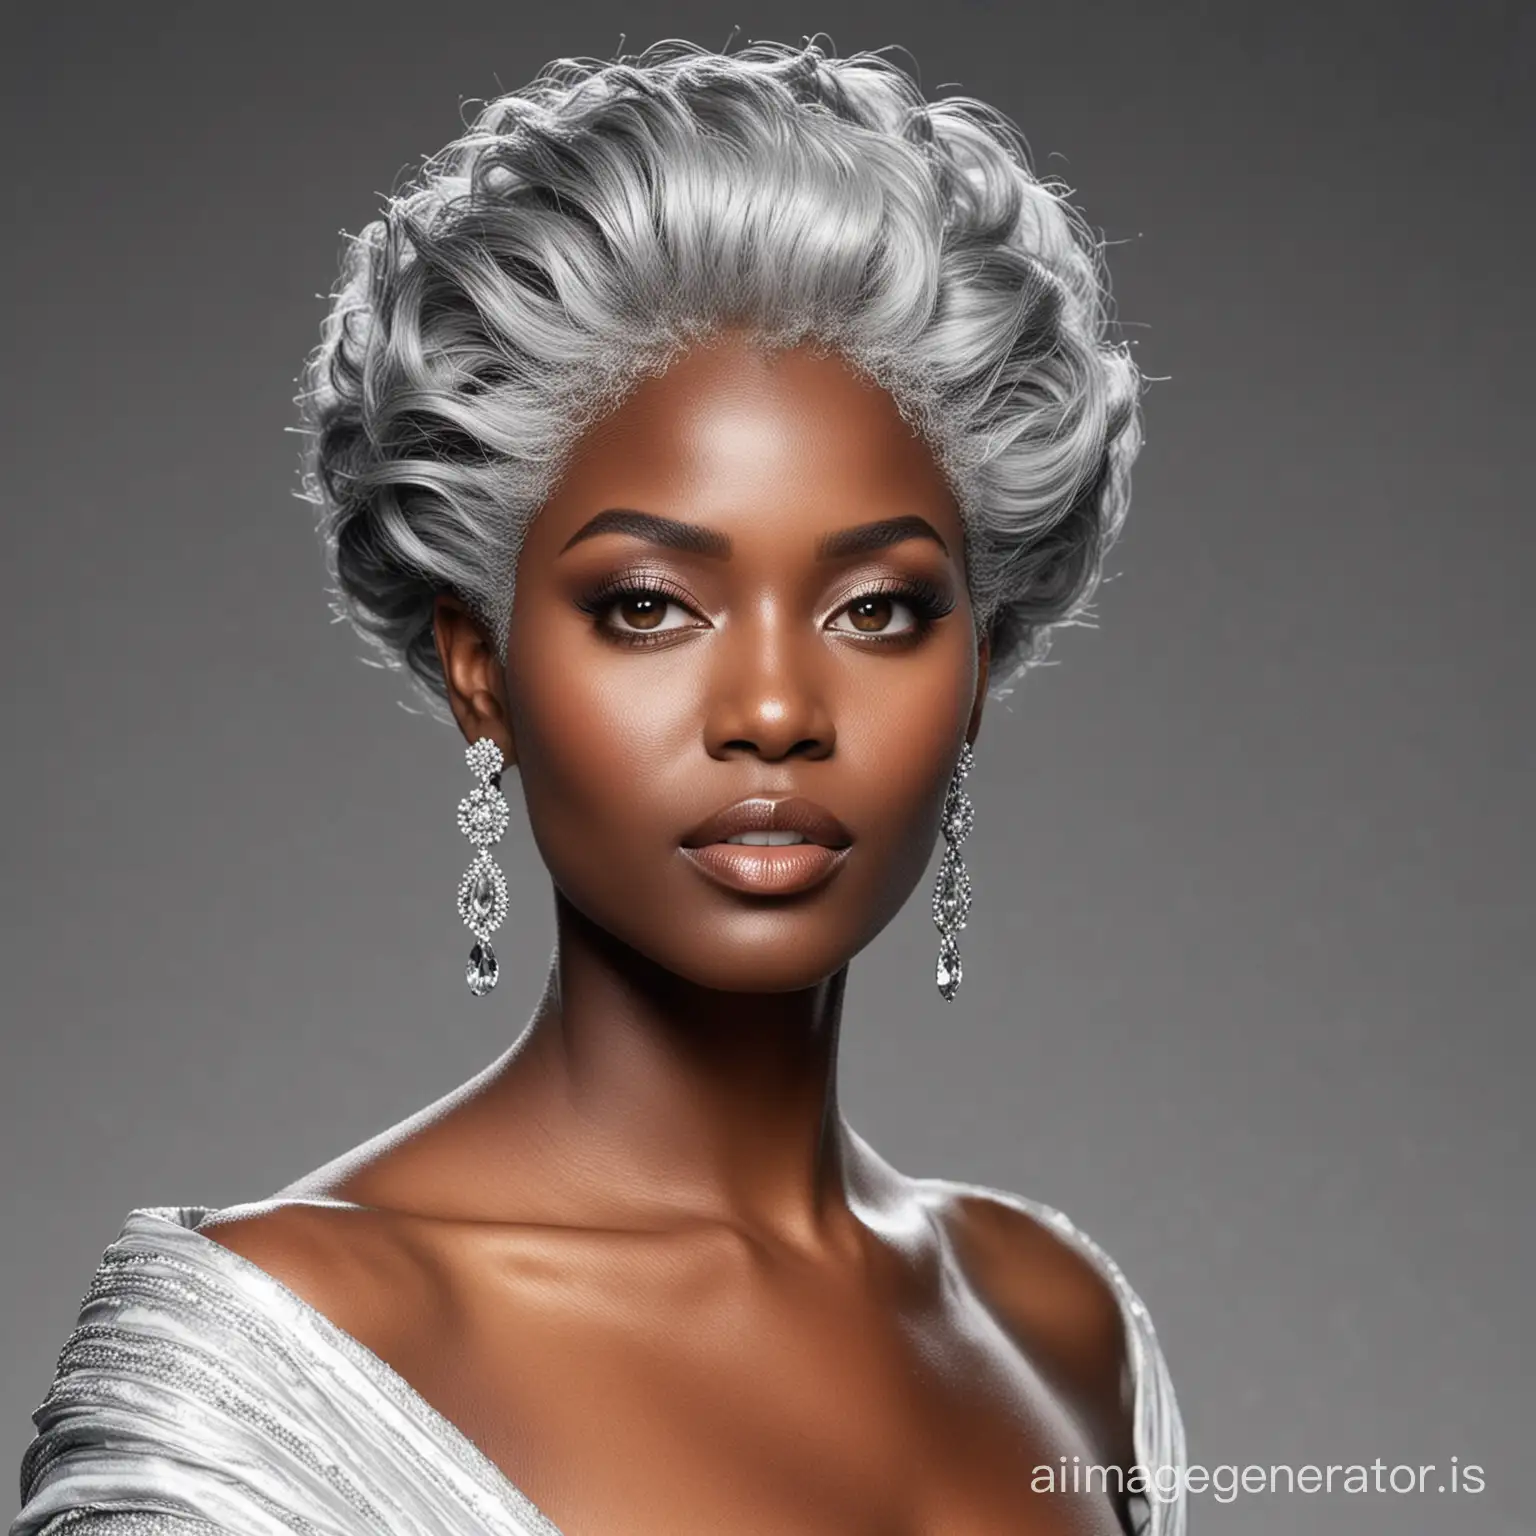 Elegant-Black-Woman-with-Grey-Hair-Striding-Gracefully-on-the-Runway